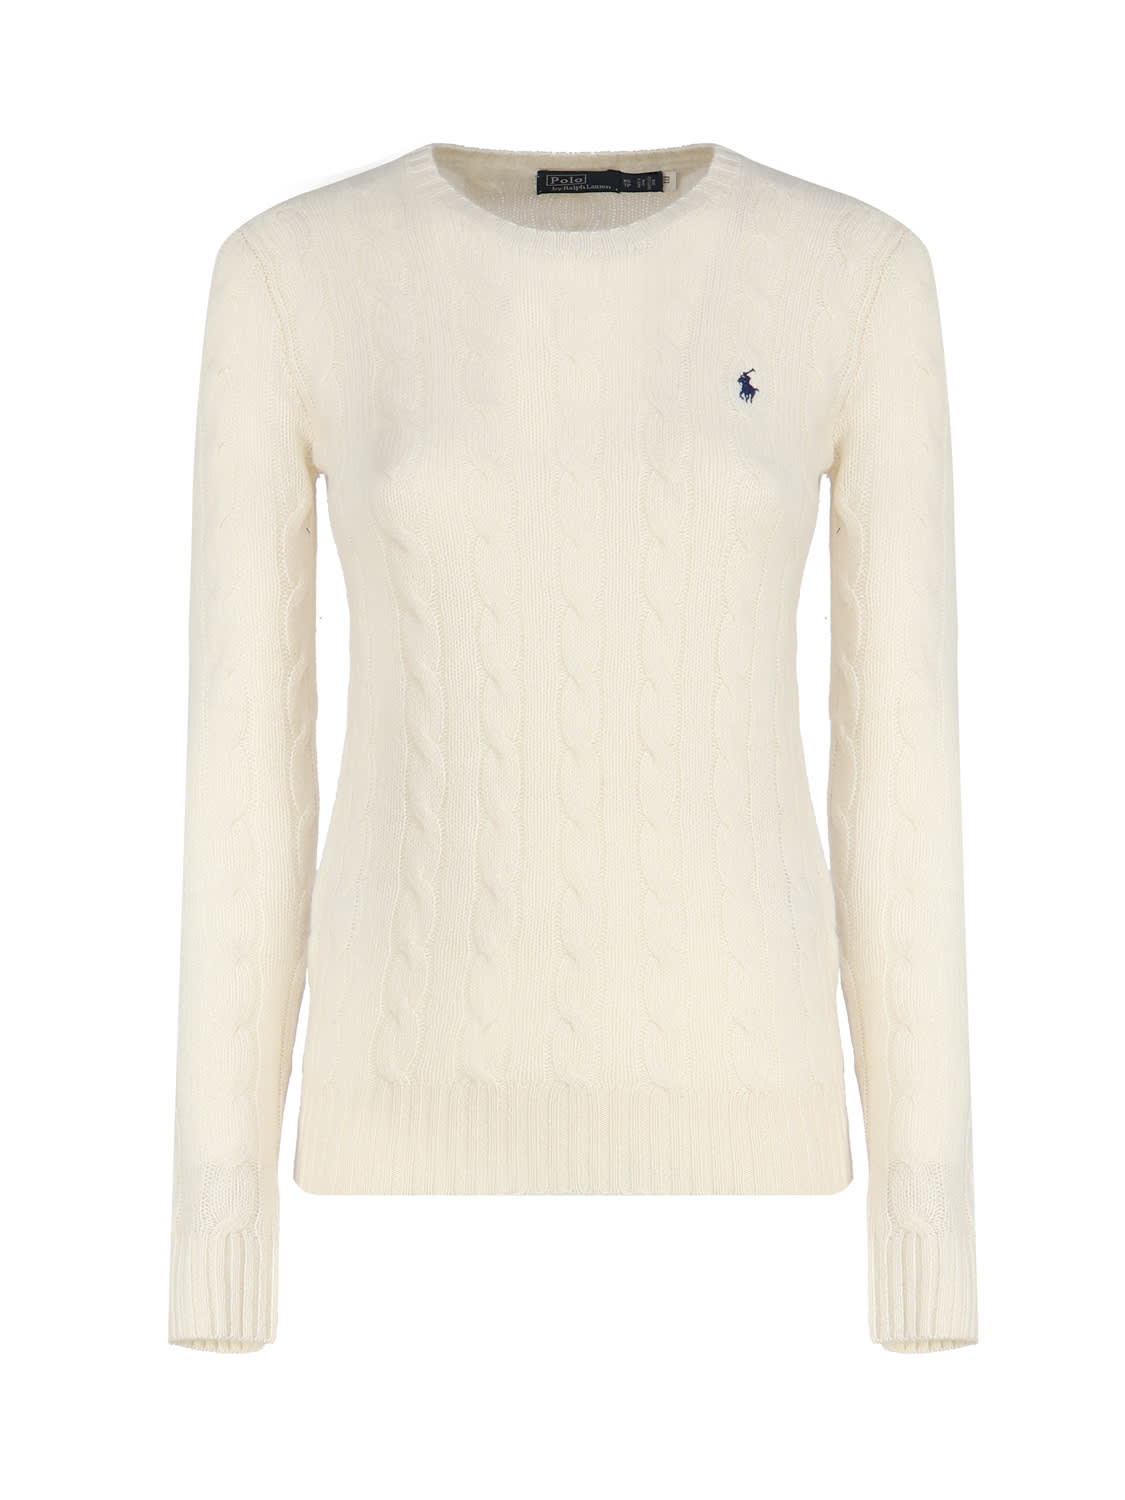 POLO RALPH LAUREN WOOL-CASHMERE CABLE KNIT SWEATER